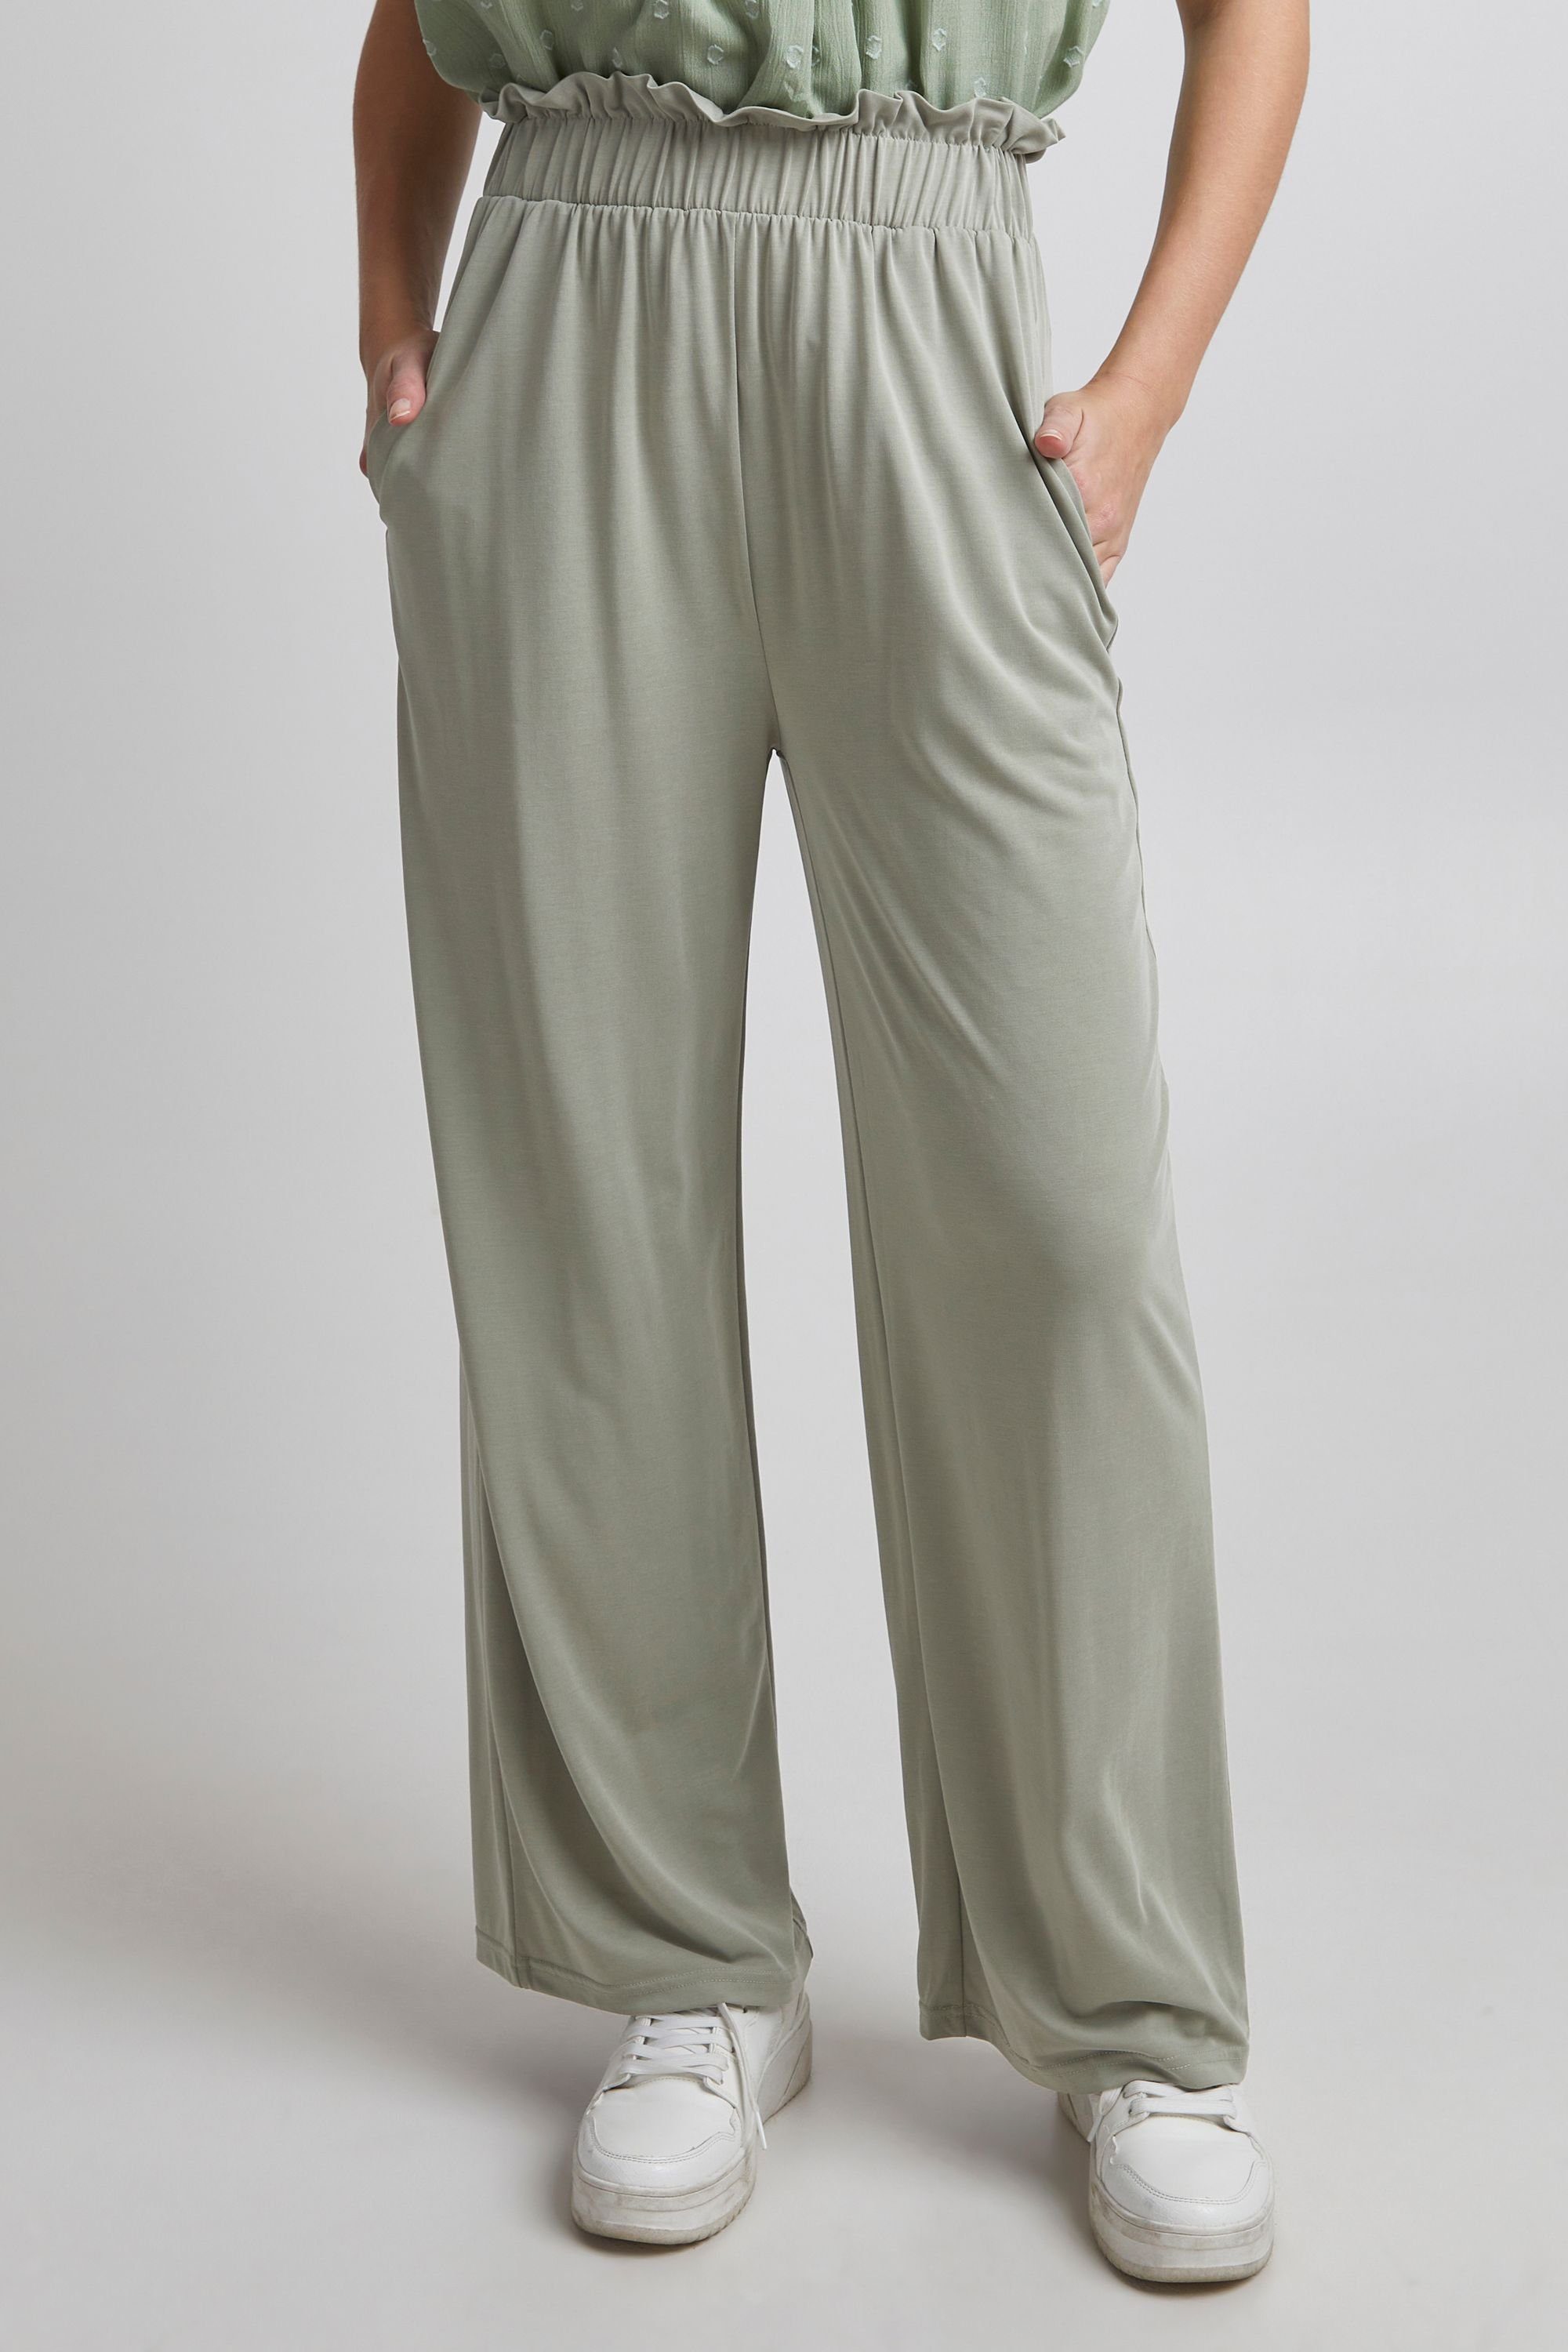 -20811288 BYPERL (166008) Stoffhose Seagrass PANTS b.young